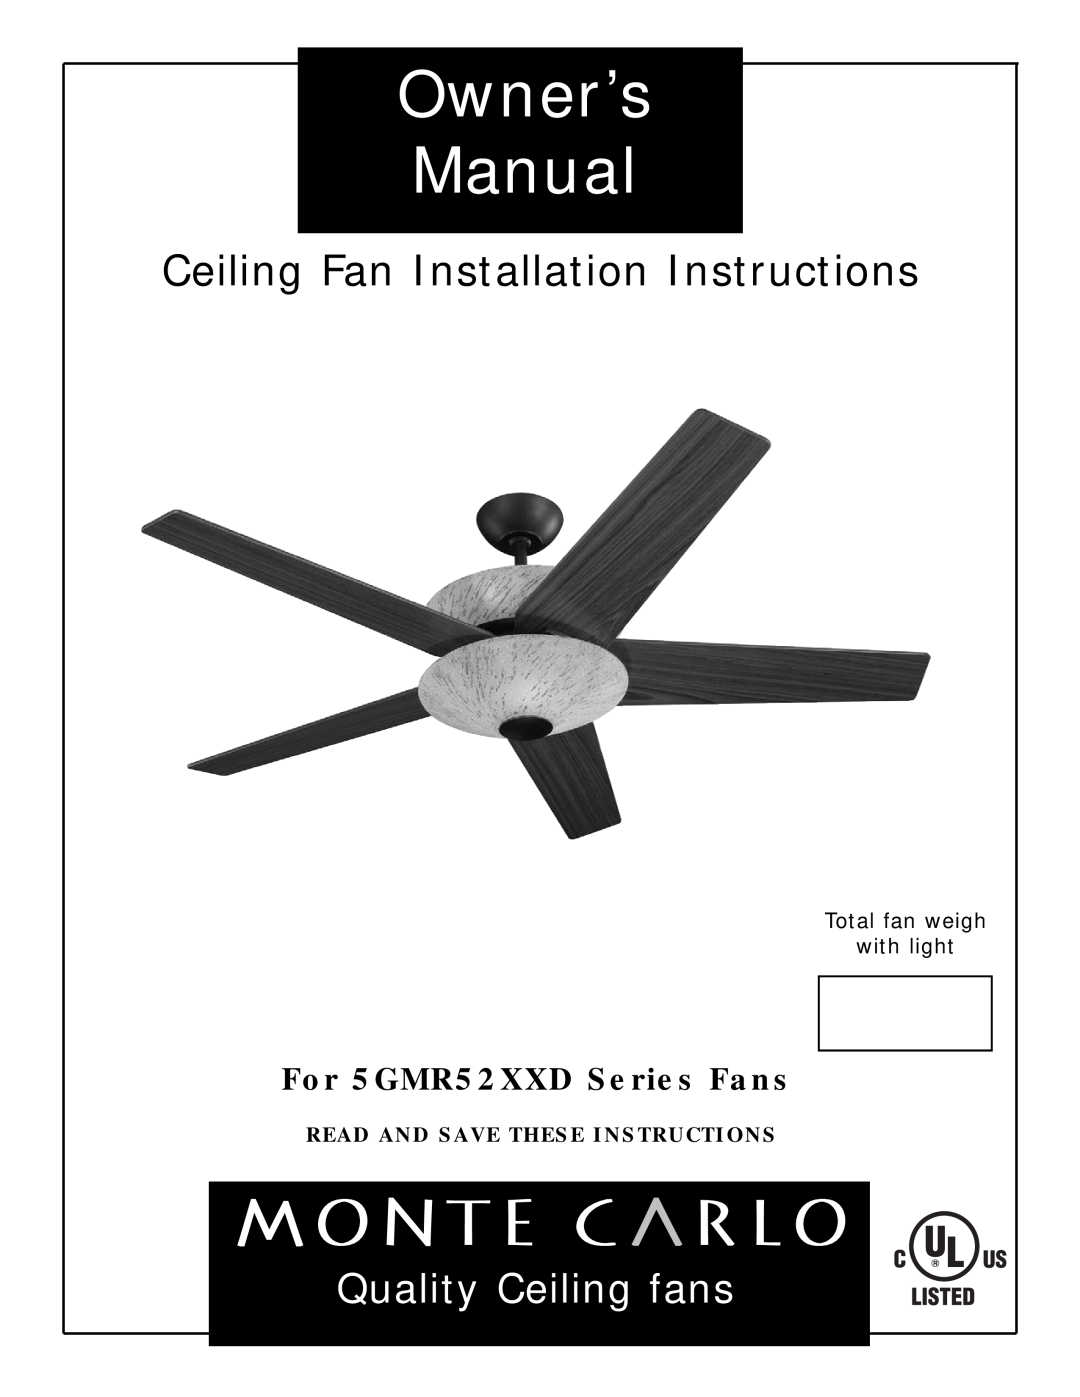 Monte Carlo Fan Company 5GMR52XXD Series owner manual Ceiling Fan Installation Instructions, Quality Ceiling fans 